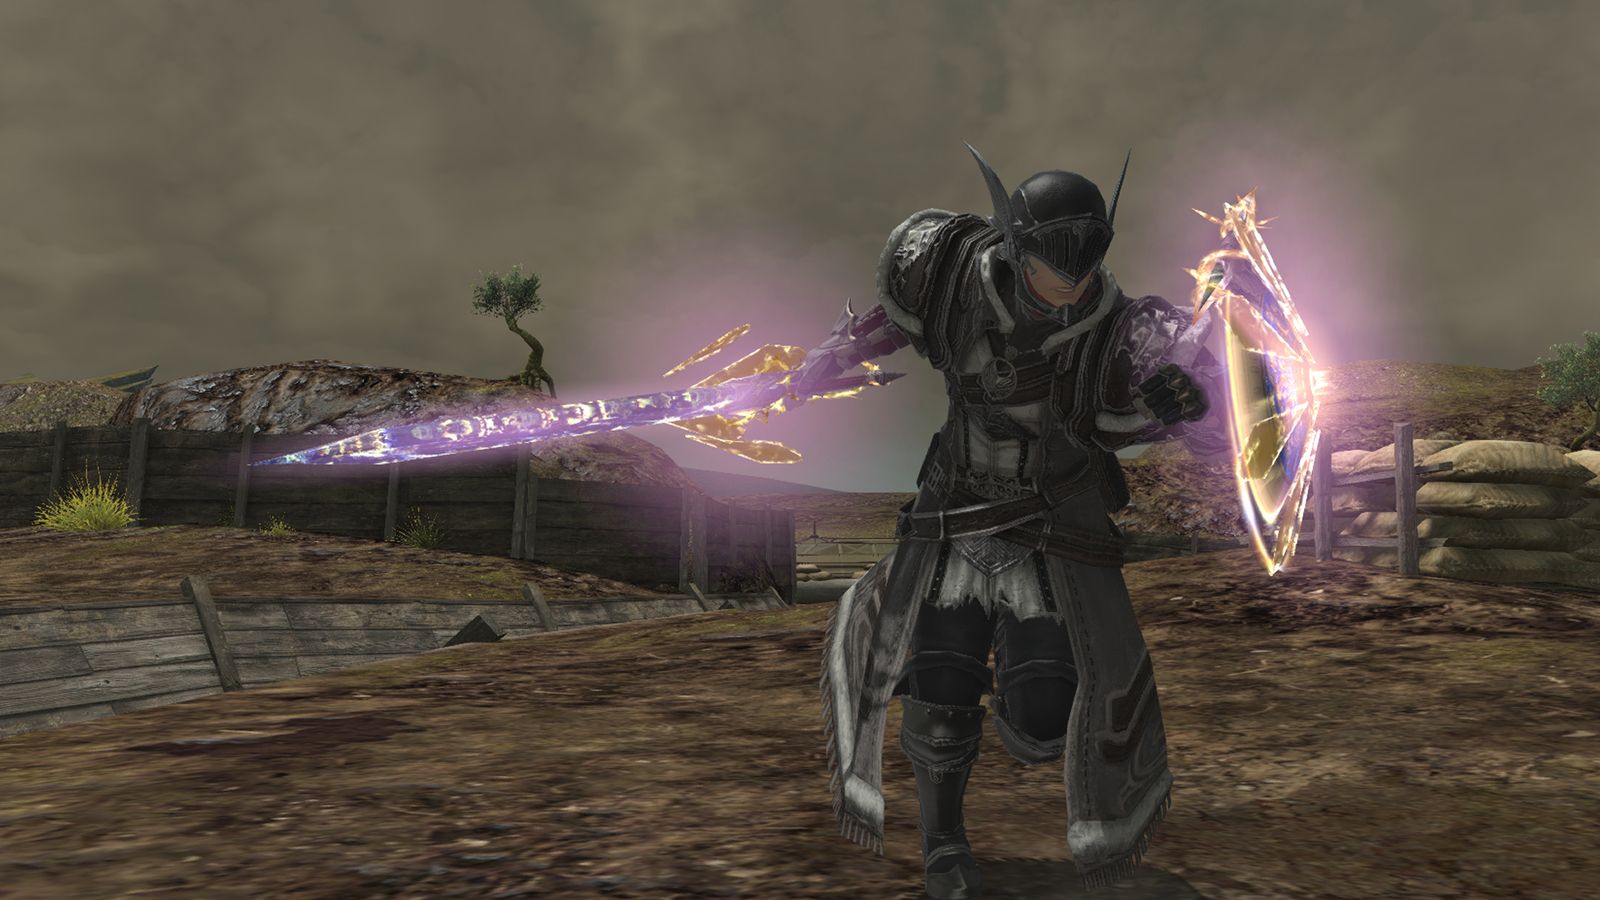 An image of a paladin from Final Fantasy XIV, wielding his Shadowbringers Relic Weapon. He is sprinting through a war-torn battlefield.